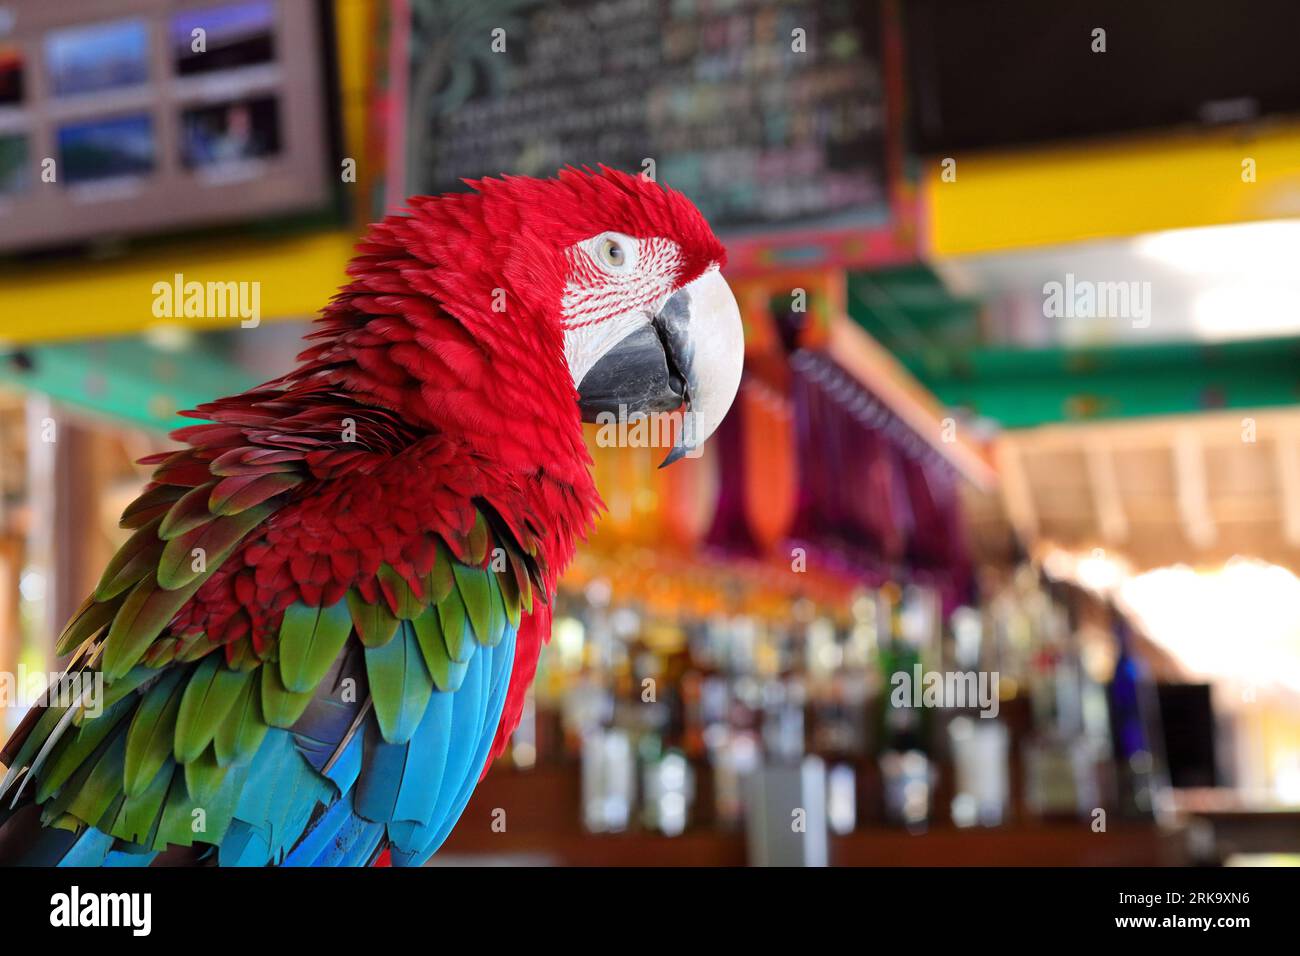 Colorful turquoise and green feathers on parrot's wing, Key West, Florida,  USA Stock Photo - Alamy